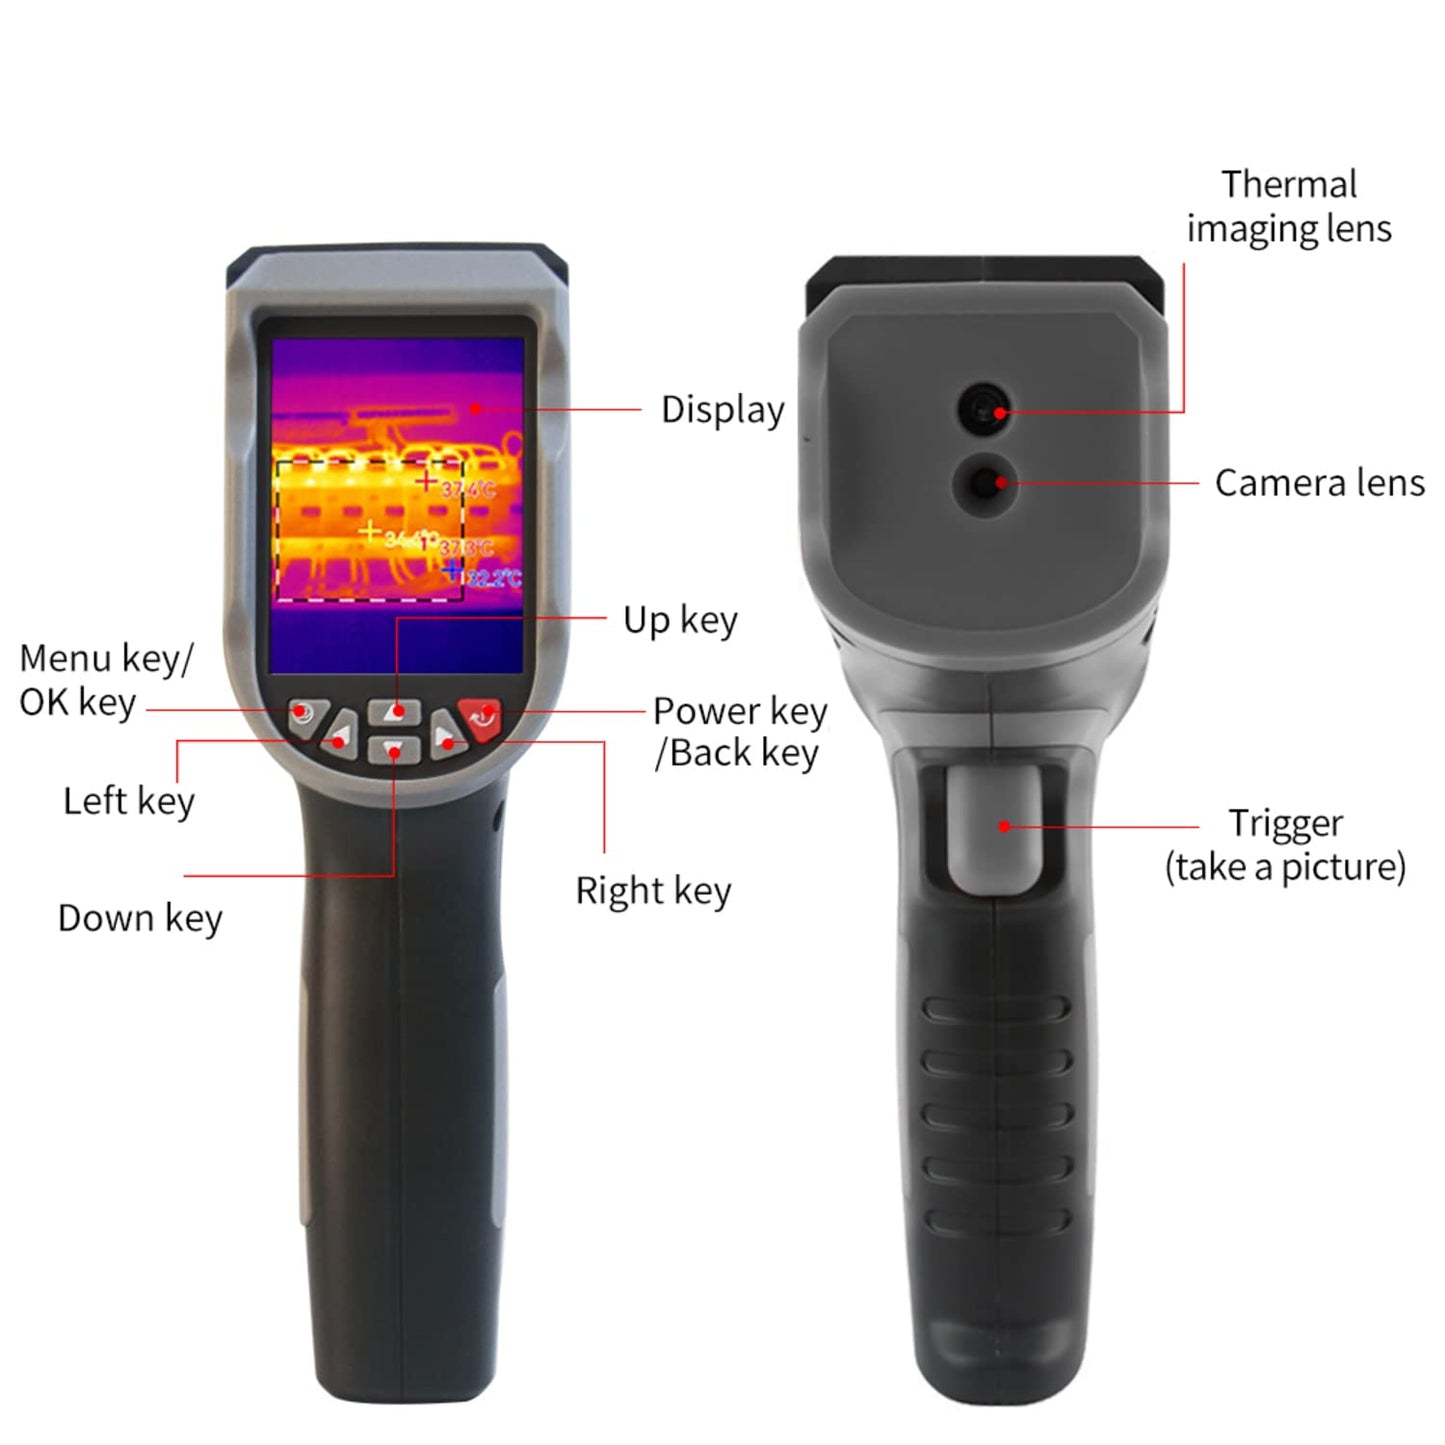 Noyafa NF-521S Handheld Thermal Imaging Camera with 2.8" Screen , 120 * 90 IR Resolution 1 Million Pixels, 8 Color Palettes for Electrical / Mechanical / Building / HVAC Inspection